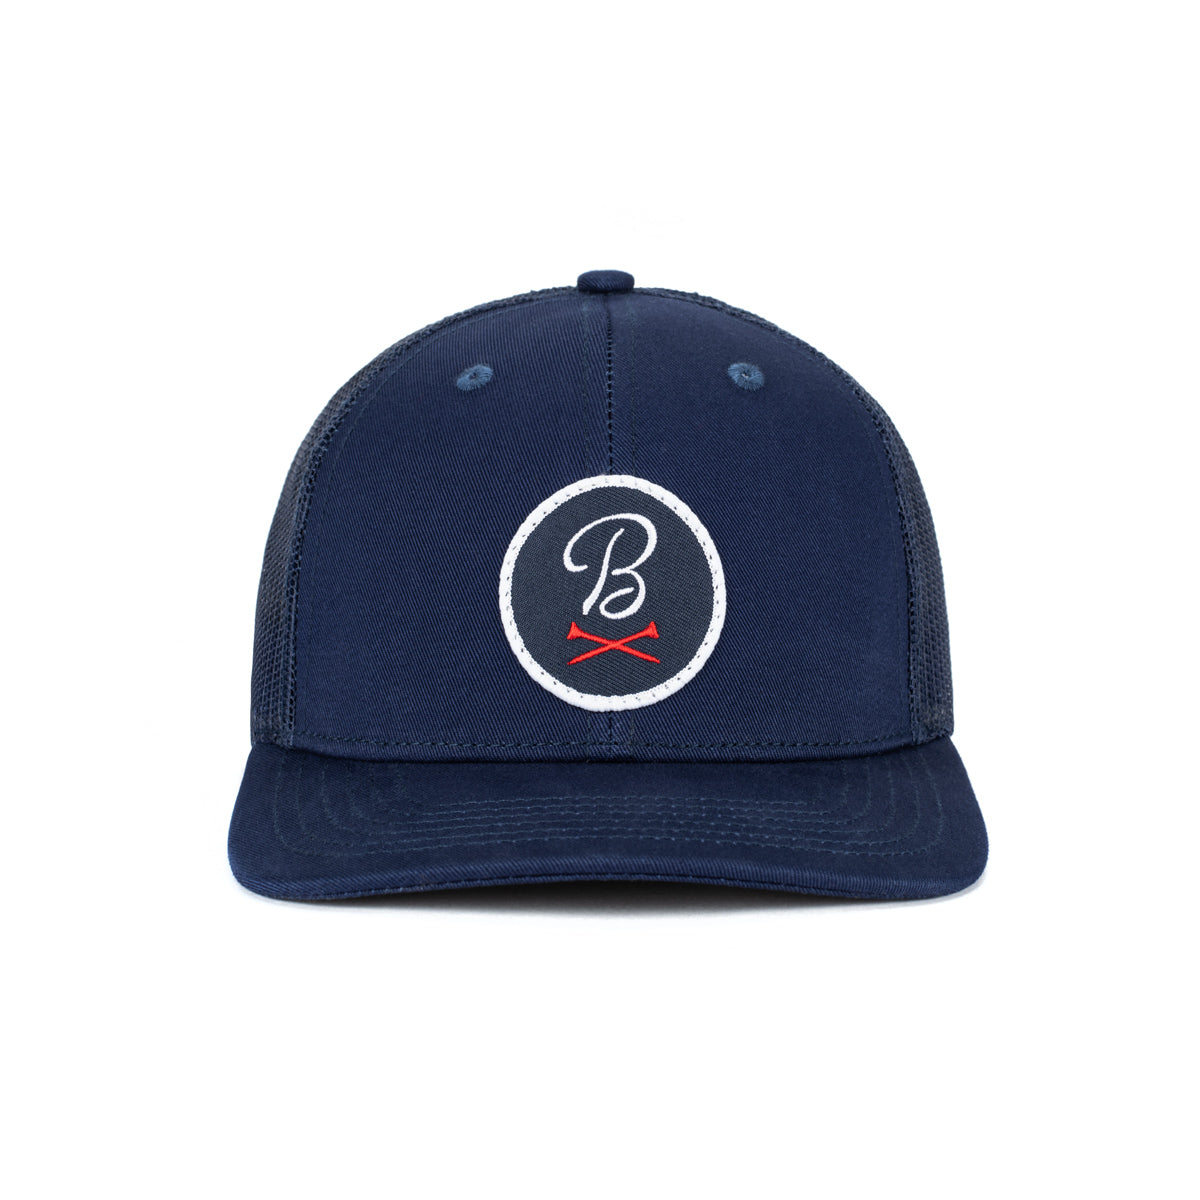 Barstool Golf Circle Patch Trucker Hat-Hats-Fore Play-Navy-Barstool Sports